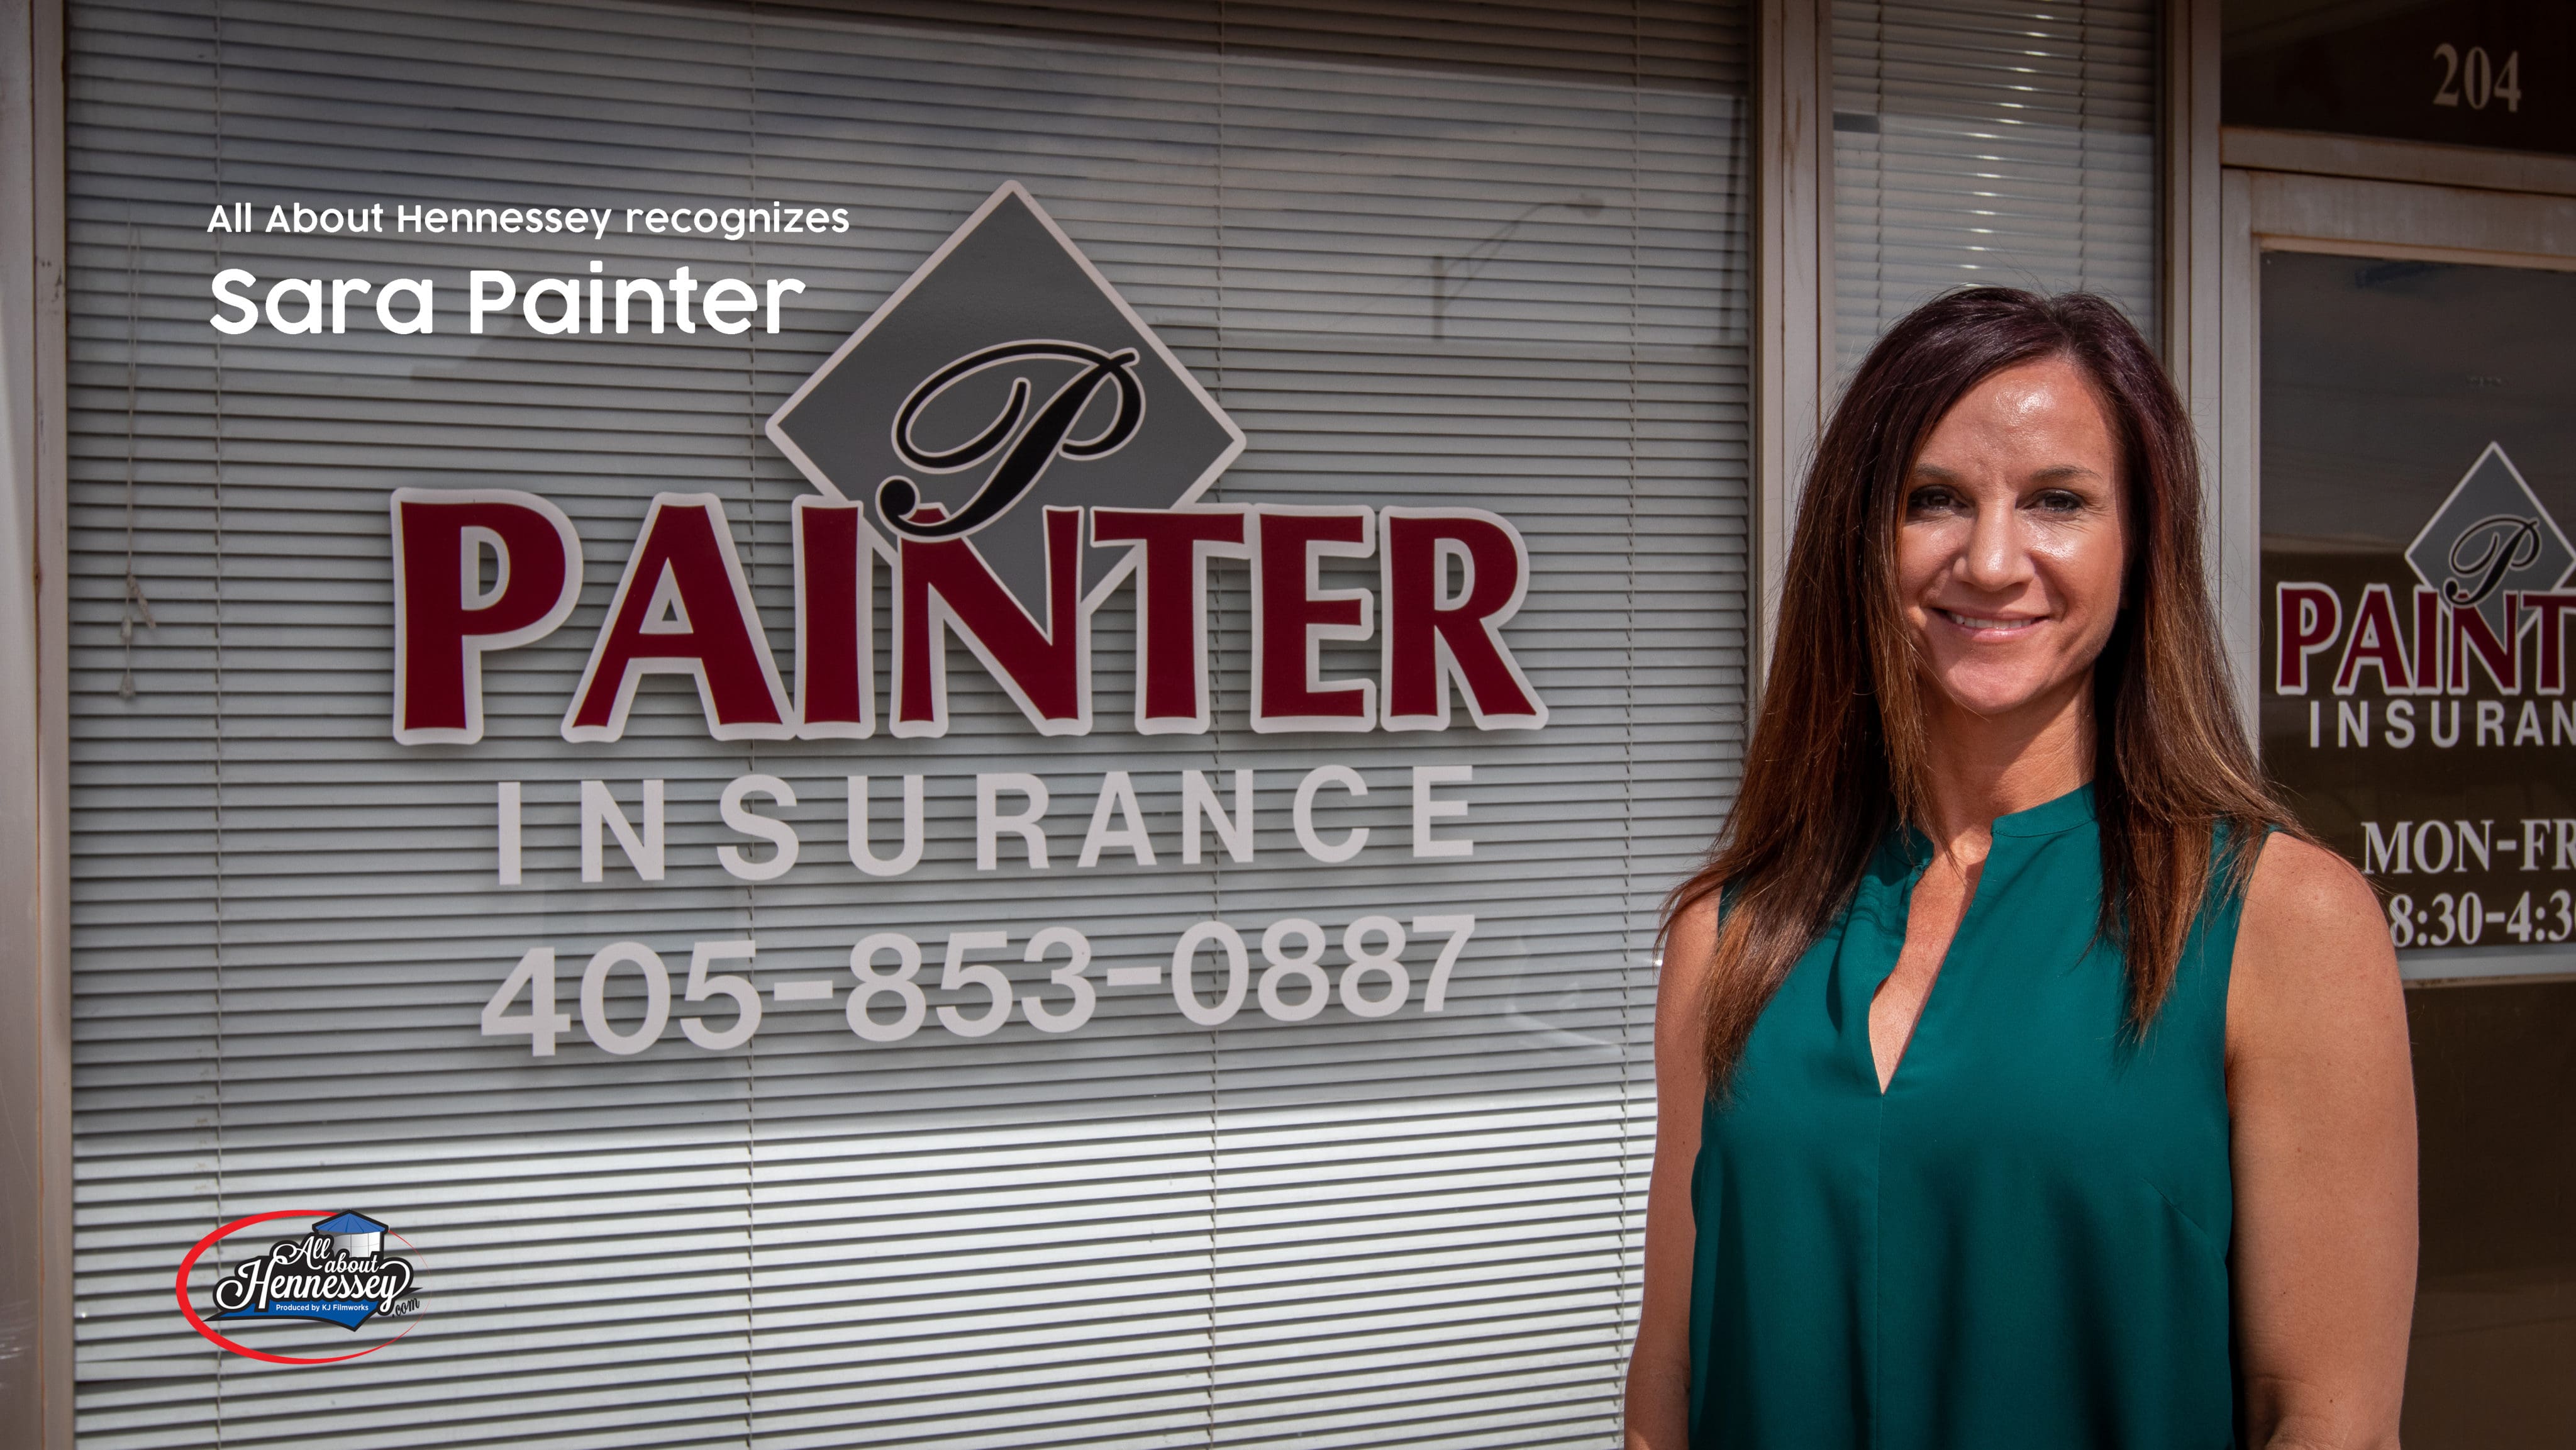 THIS WEEK ALL ABOUT HENNESSEY RECOGNIZES SARA PAINTER